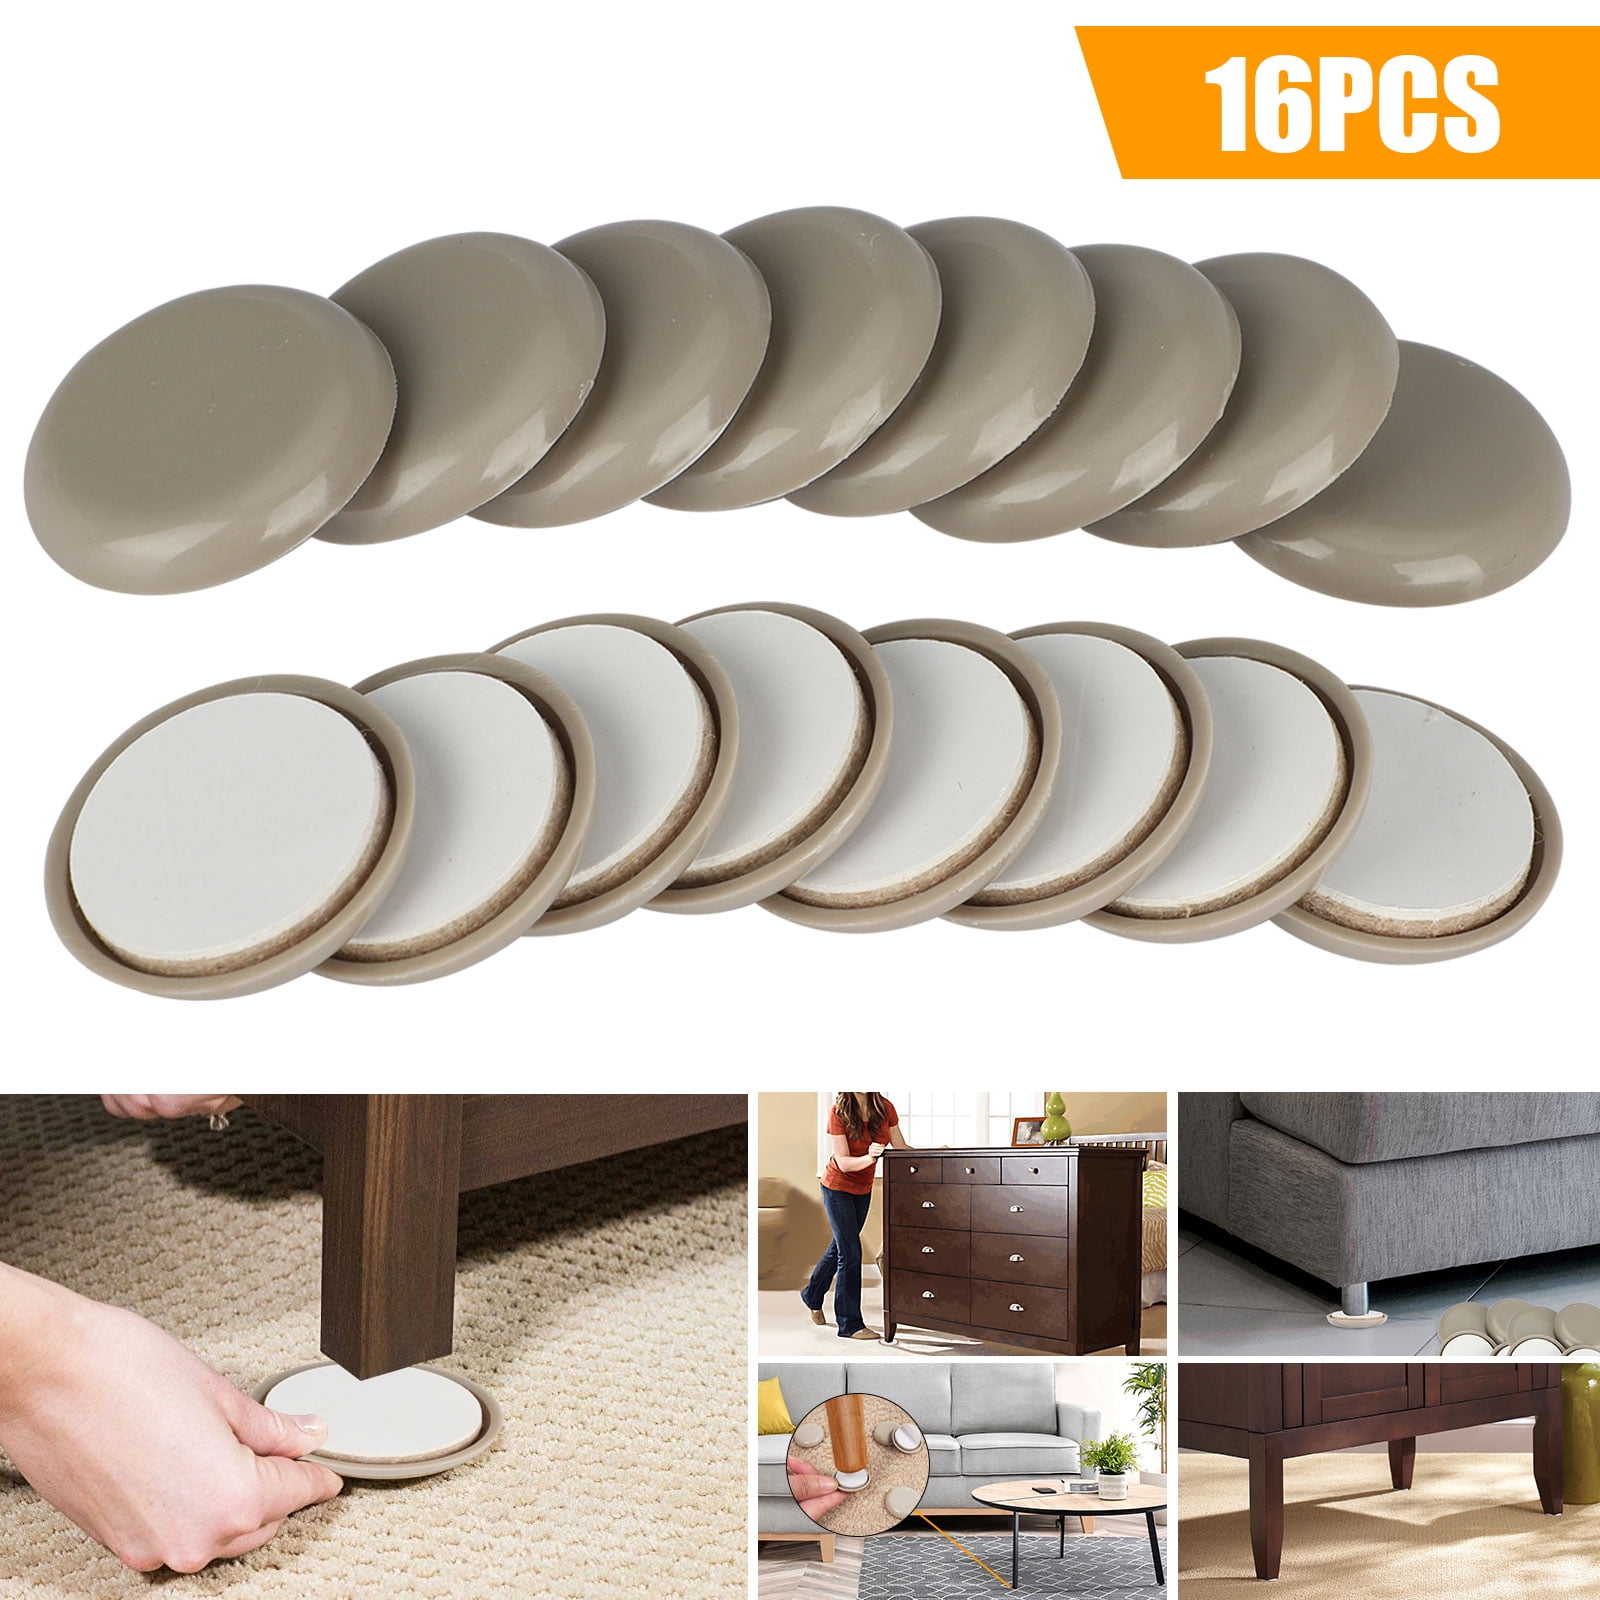 Furniture Sliders 16 Pack, 3.5 Inch Round Furniture Pads for Hardwood  Floors and Carpet, Reusable Furniture Glides with Smooth EVA Foam 